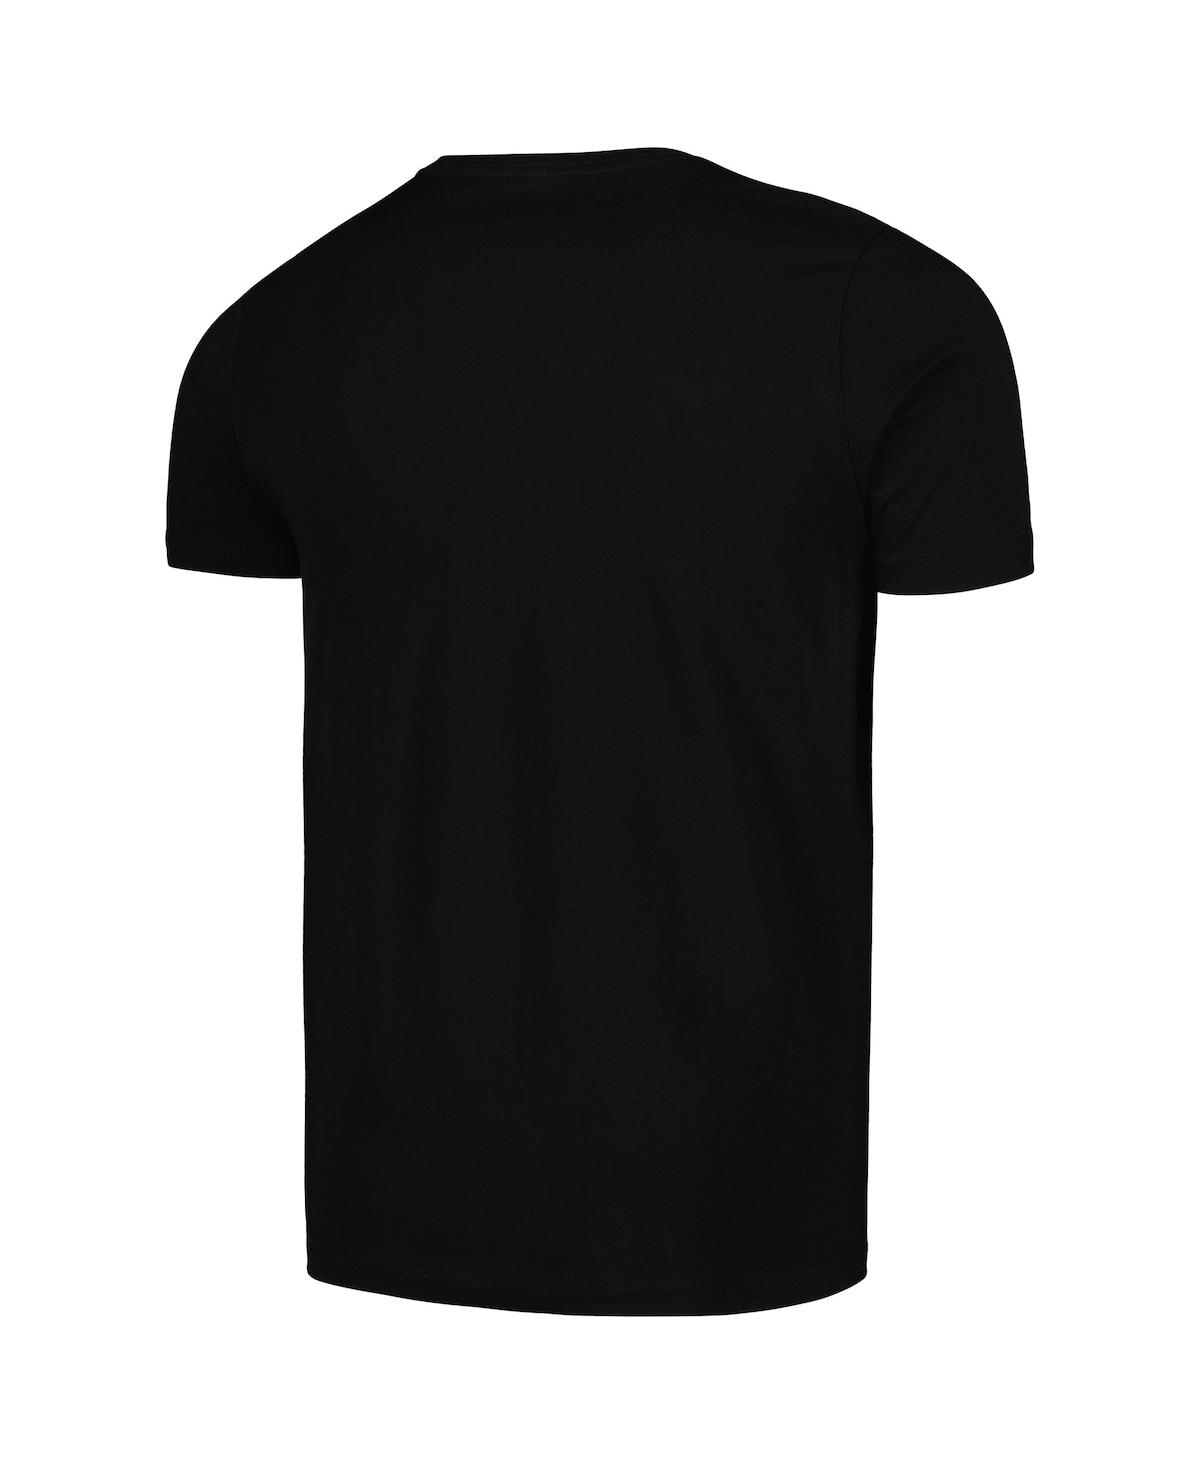 Shop Contenders Clothing Men's  Black The Godfather Strictly Business T-shirt